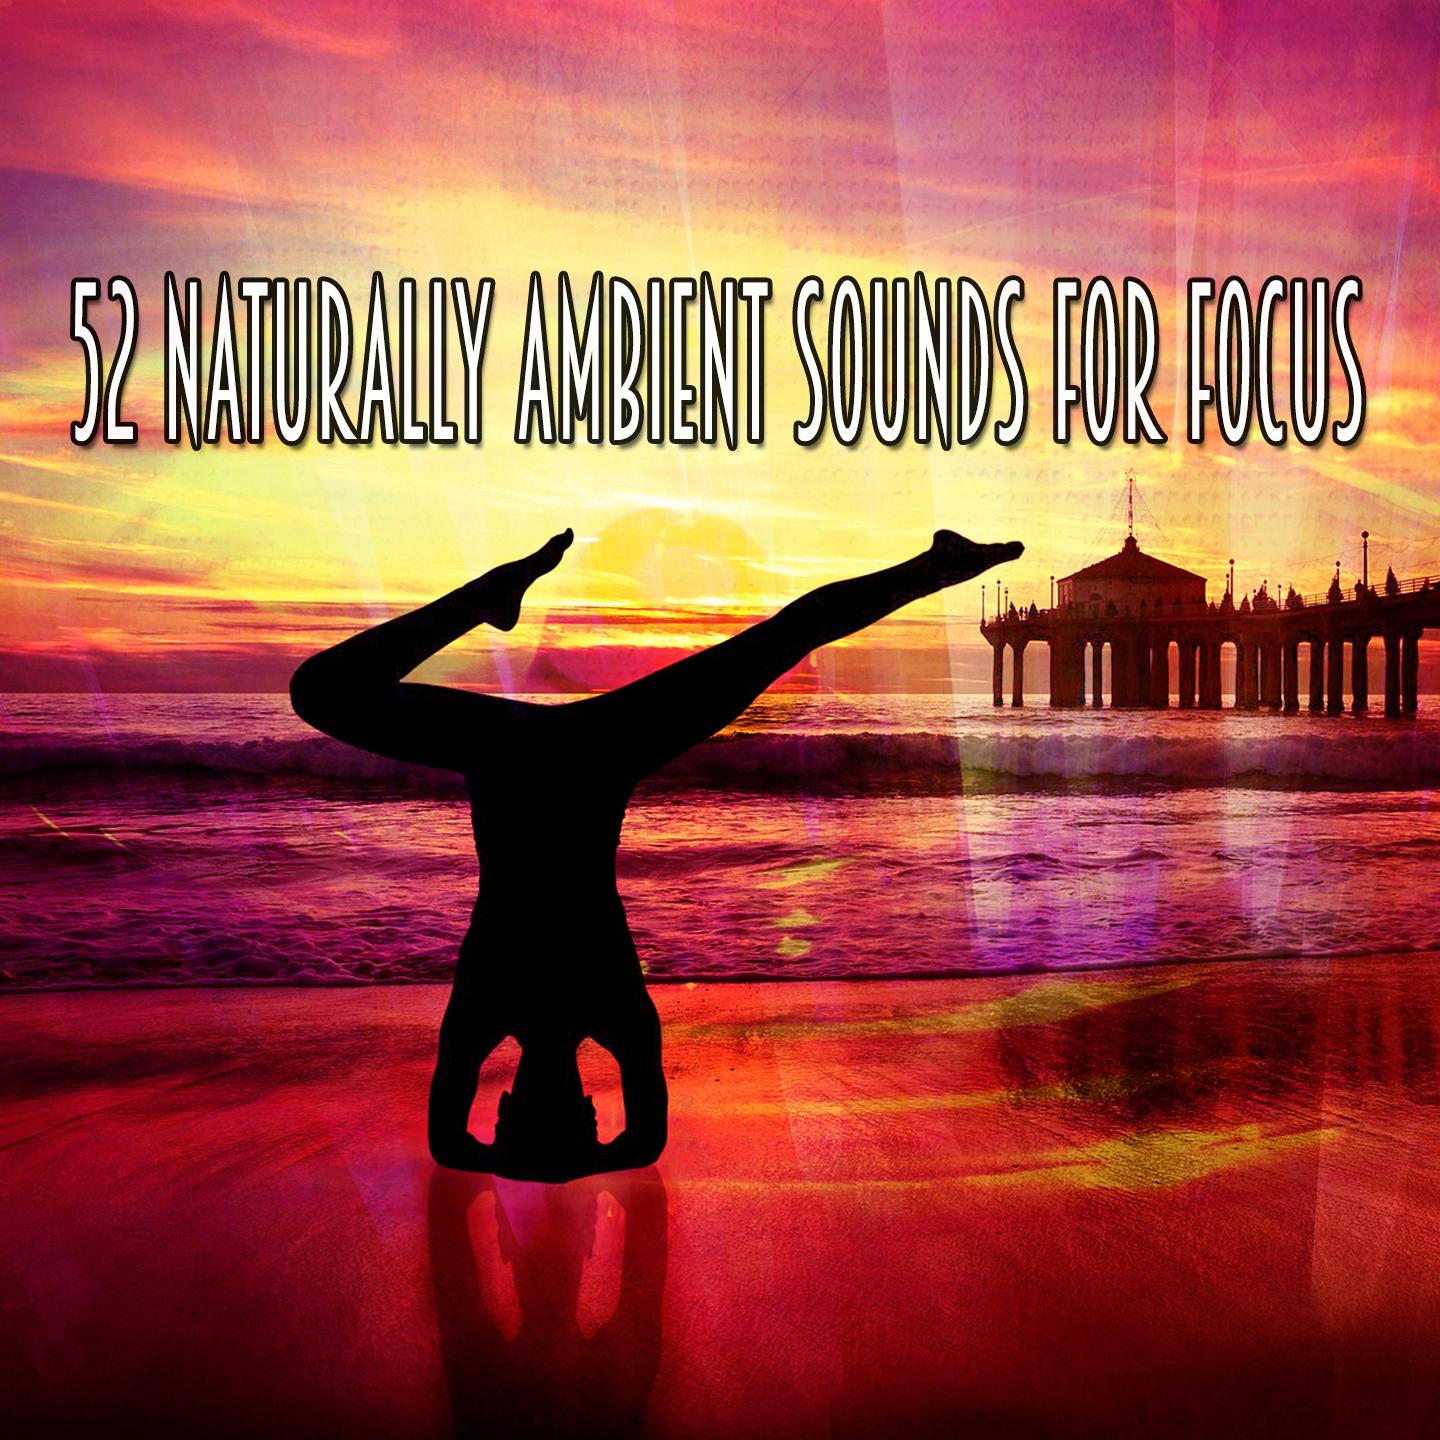 52 Naturally Ambient Sounds For Focus